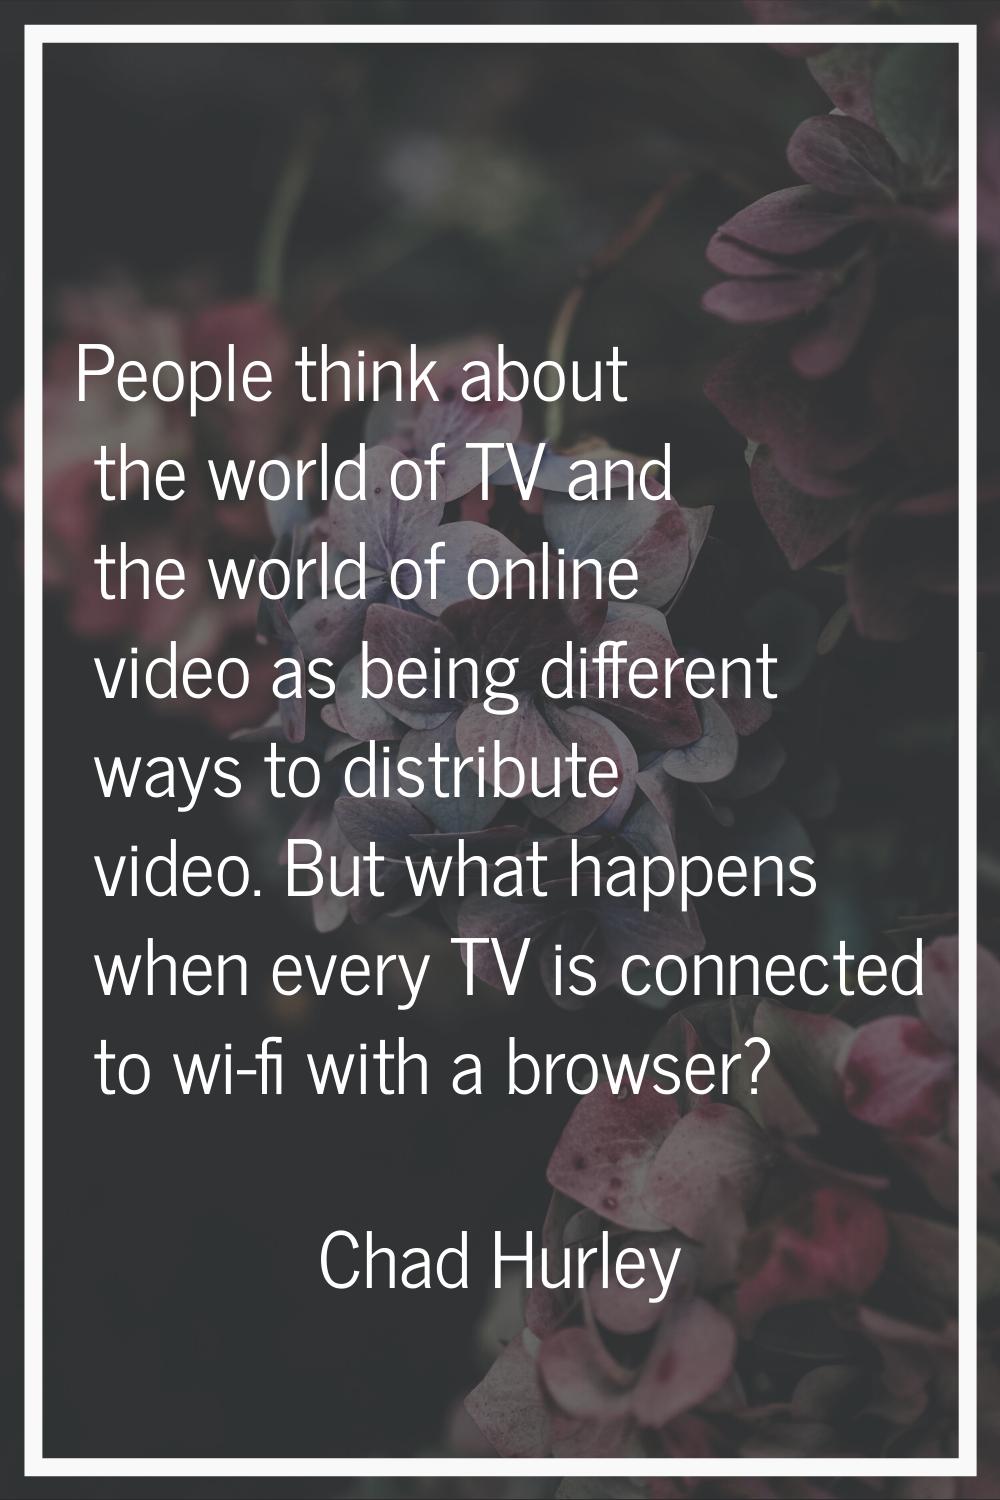 People think about the world of TV and the world of online video as being different ways to distrib